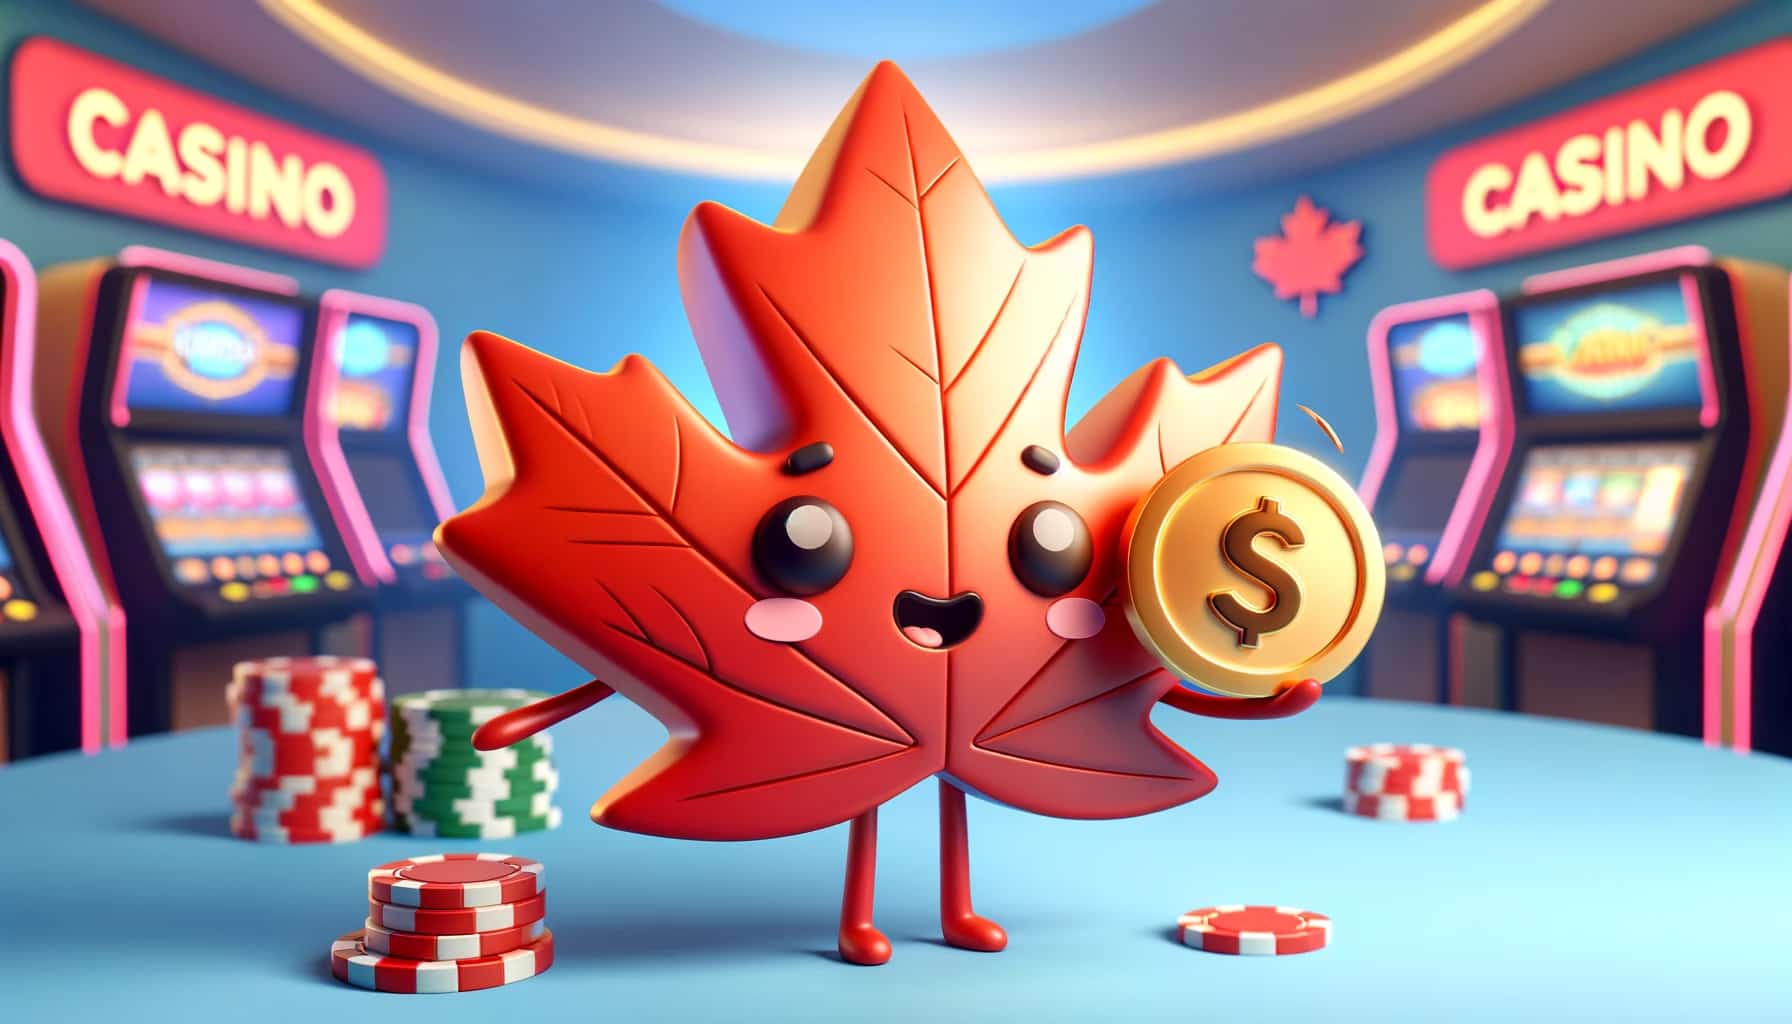 A cartoon character holding a Canadian dollar coin and a casino chip